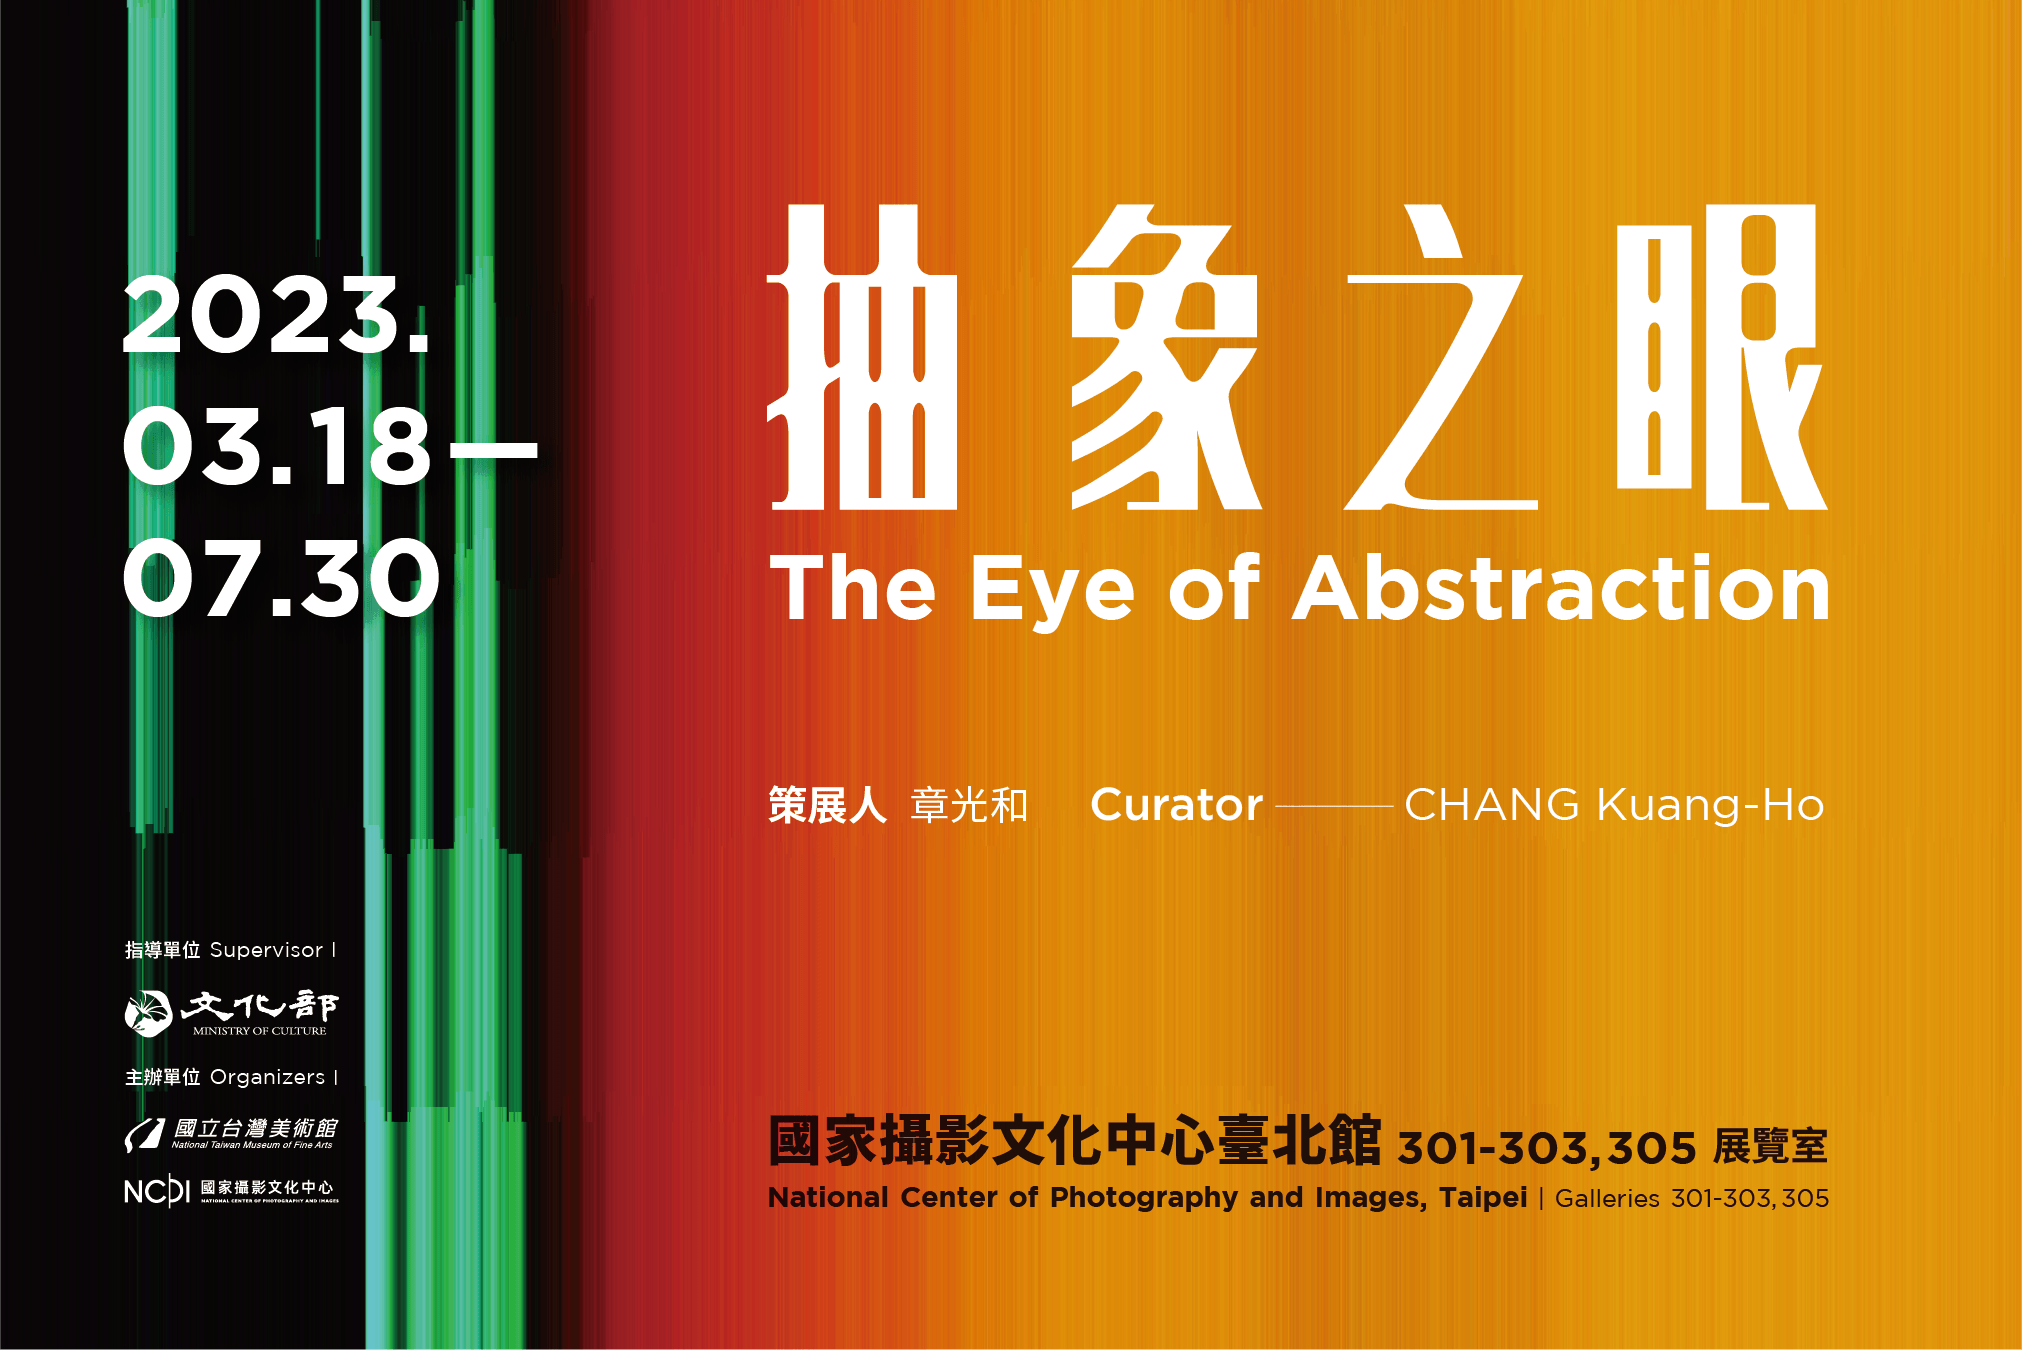 The Eye of Abstraction